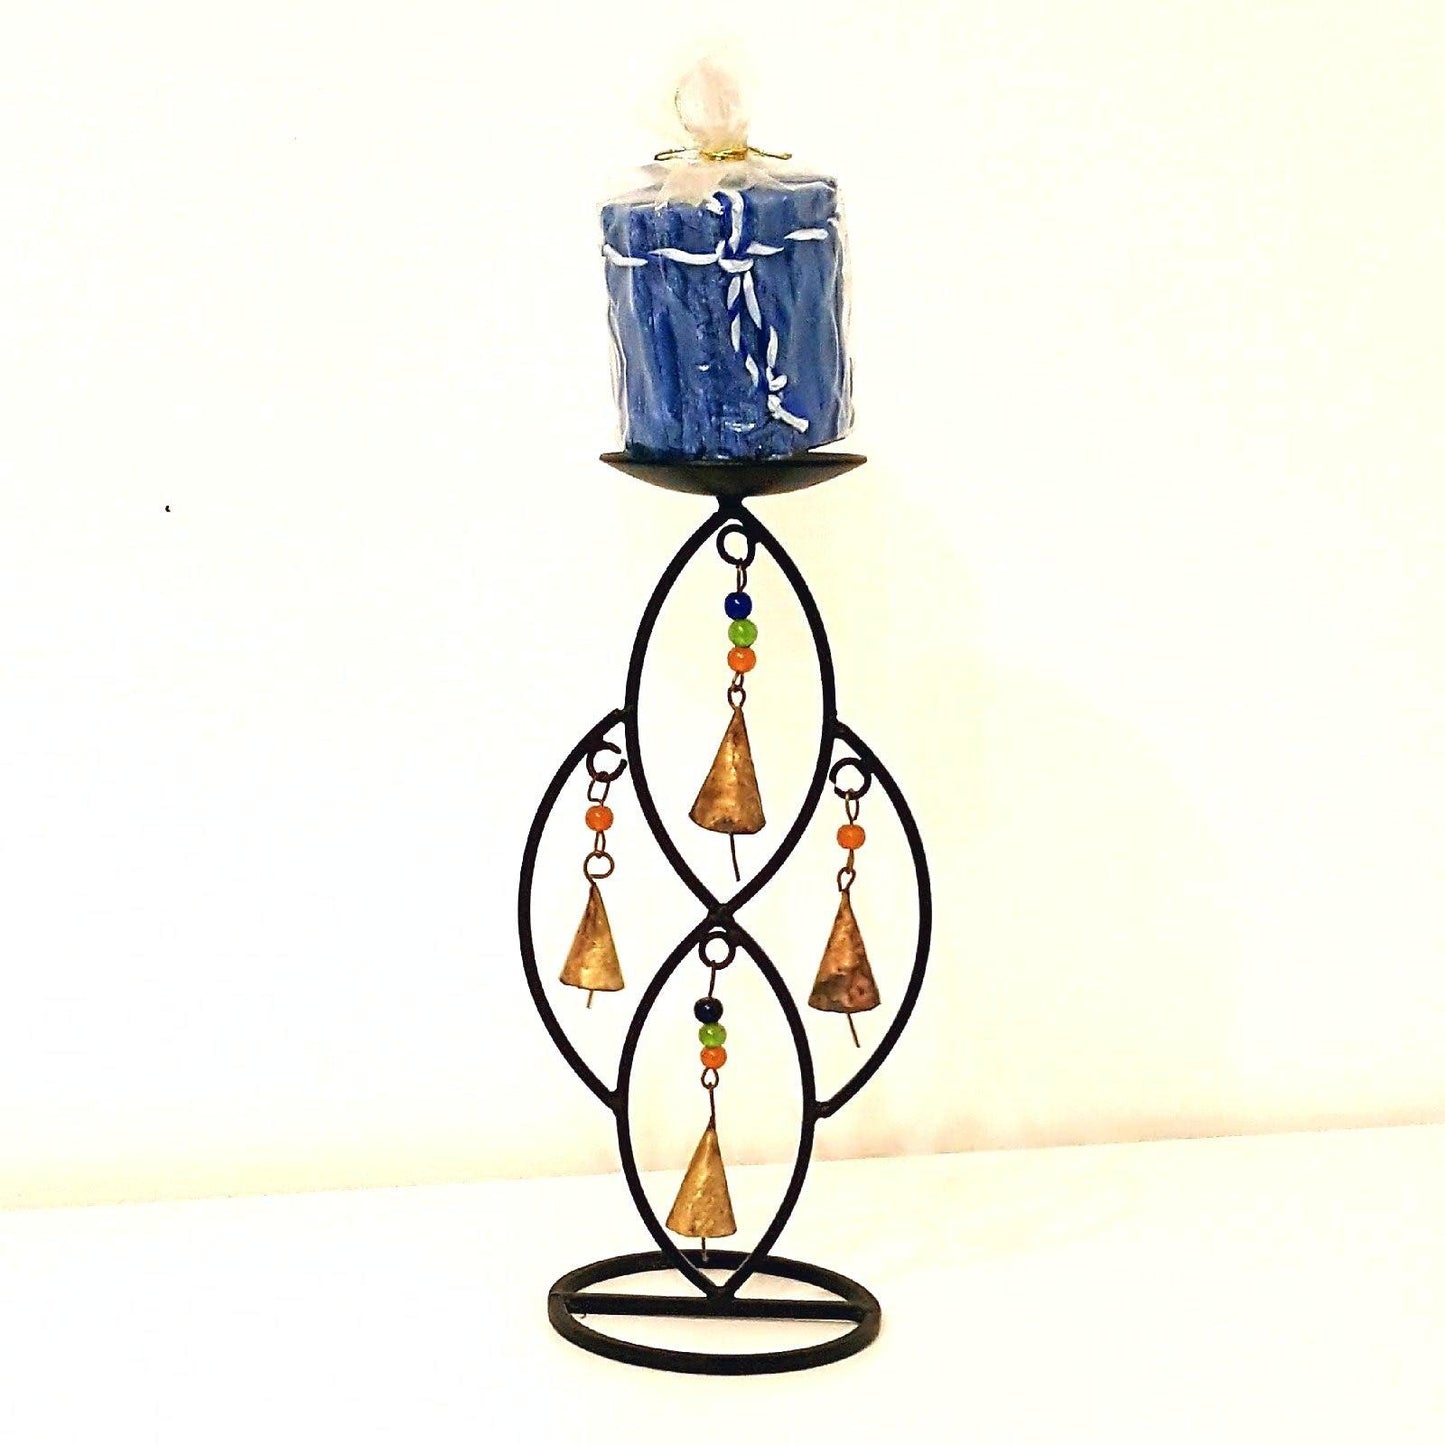 Bells & Beads Holder & Candle-Decor-in2ition mercantile